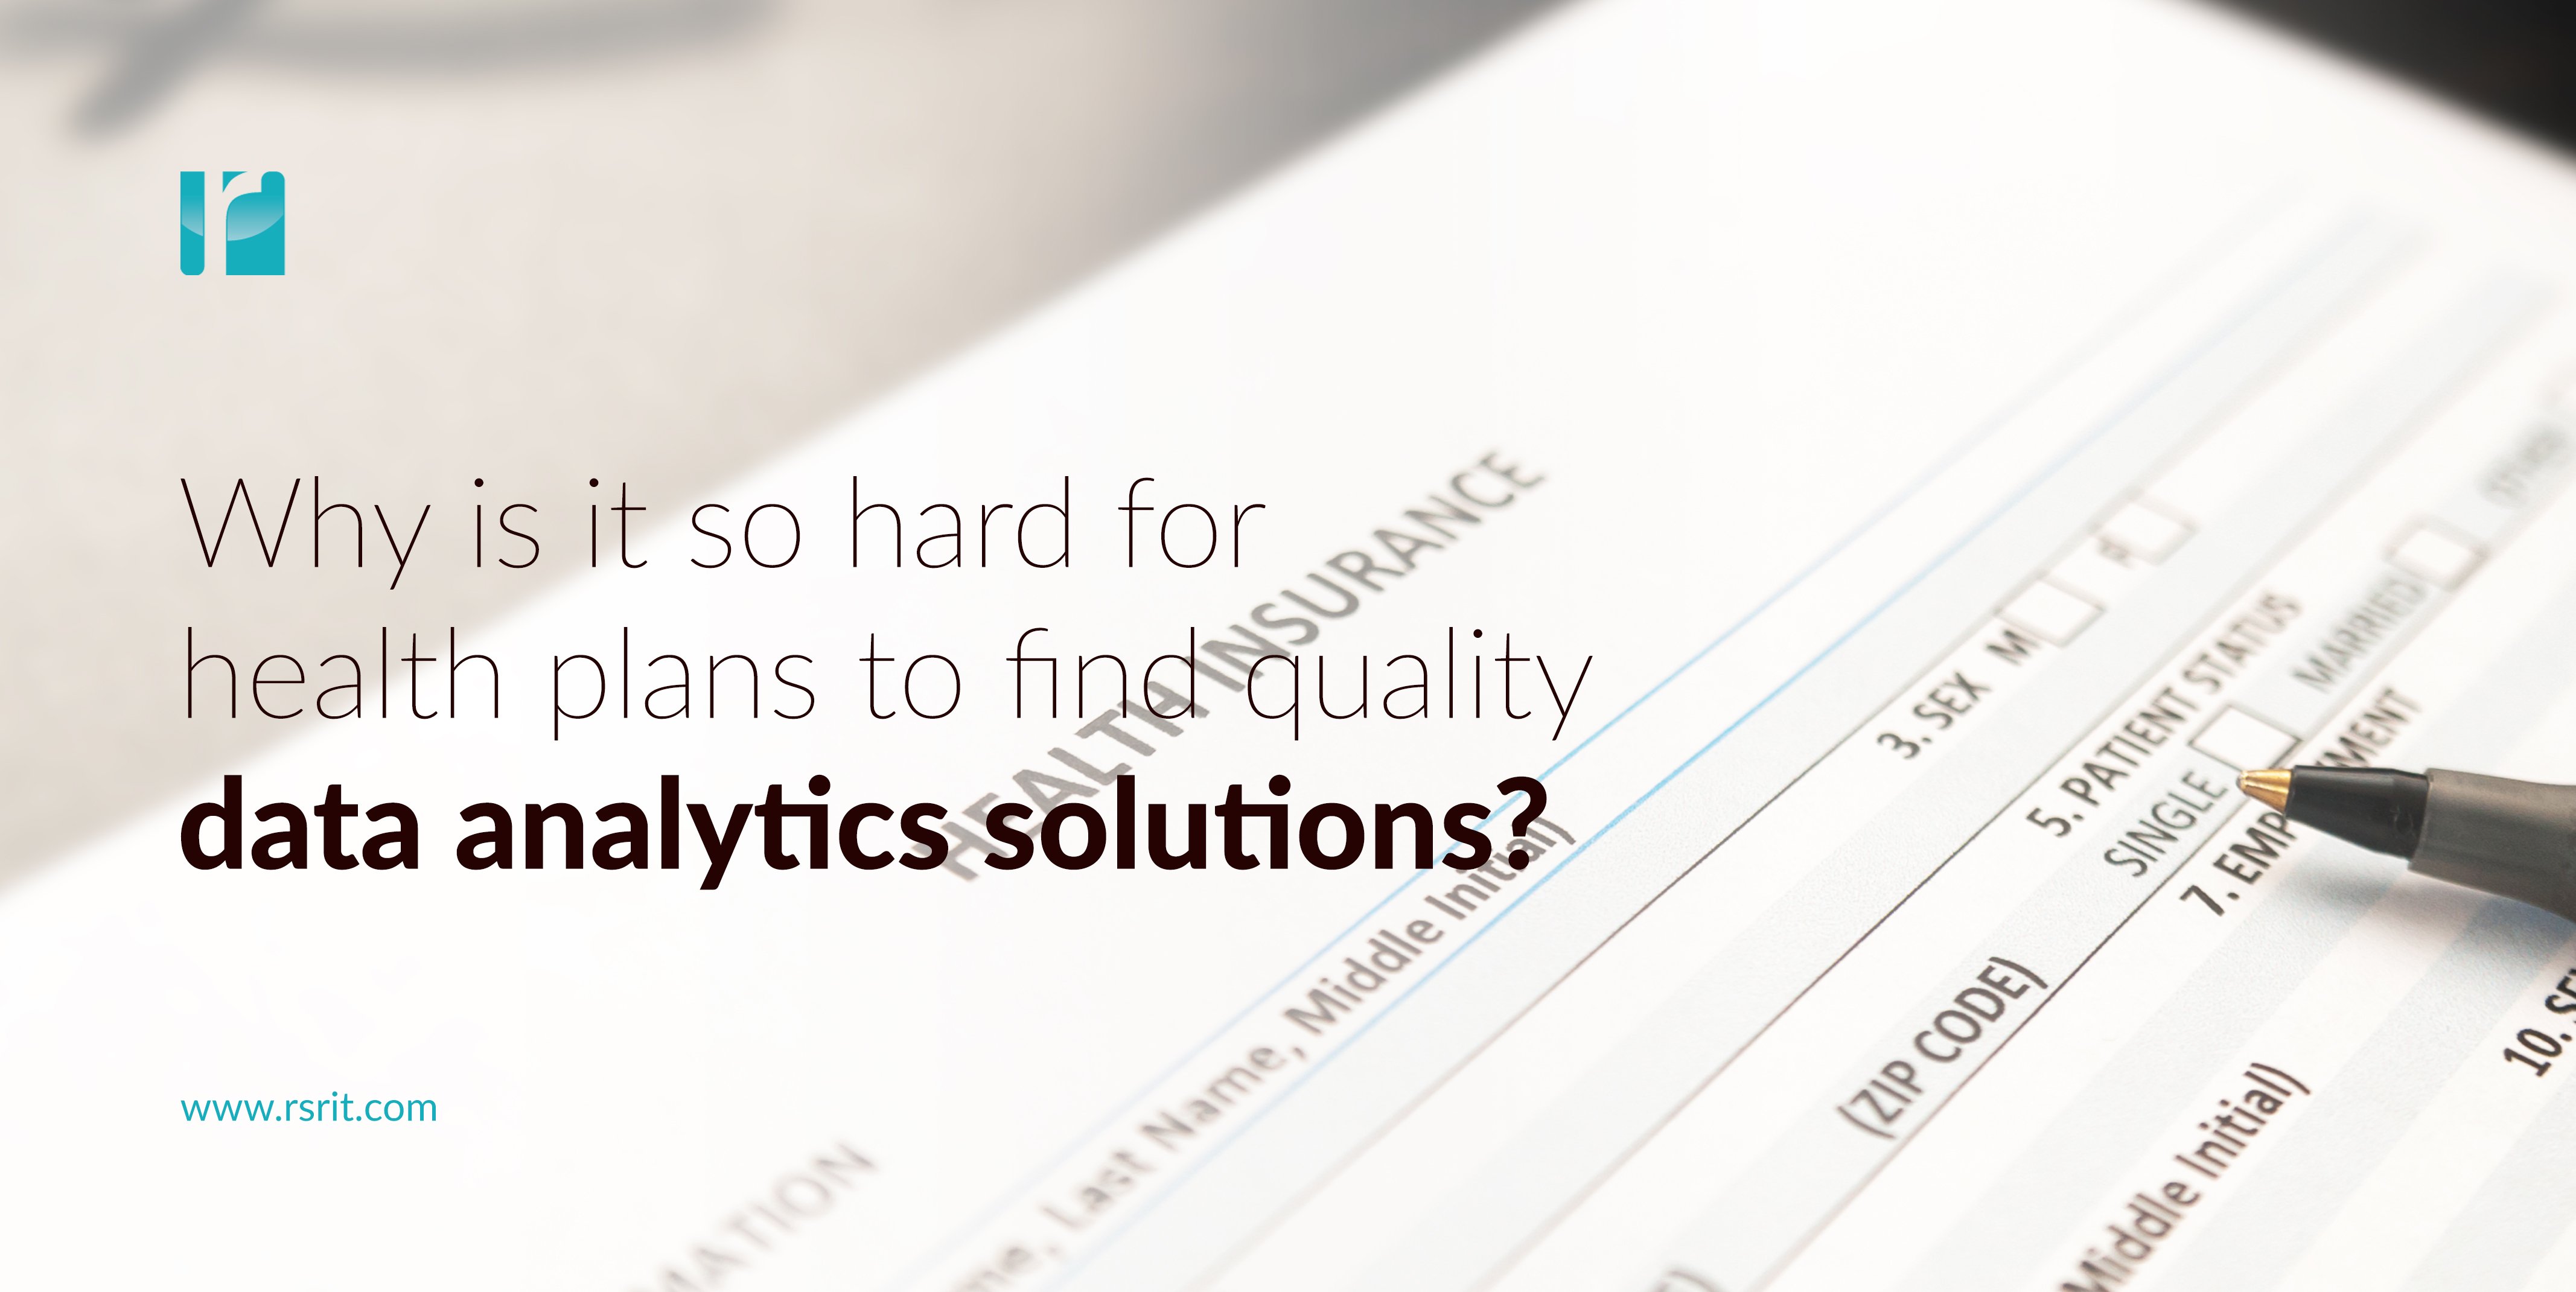 Why is it so hard for health plans to find quality data analytics solutions?